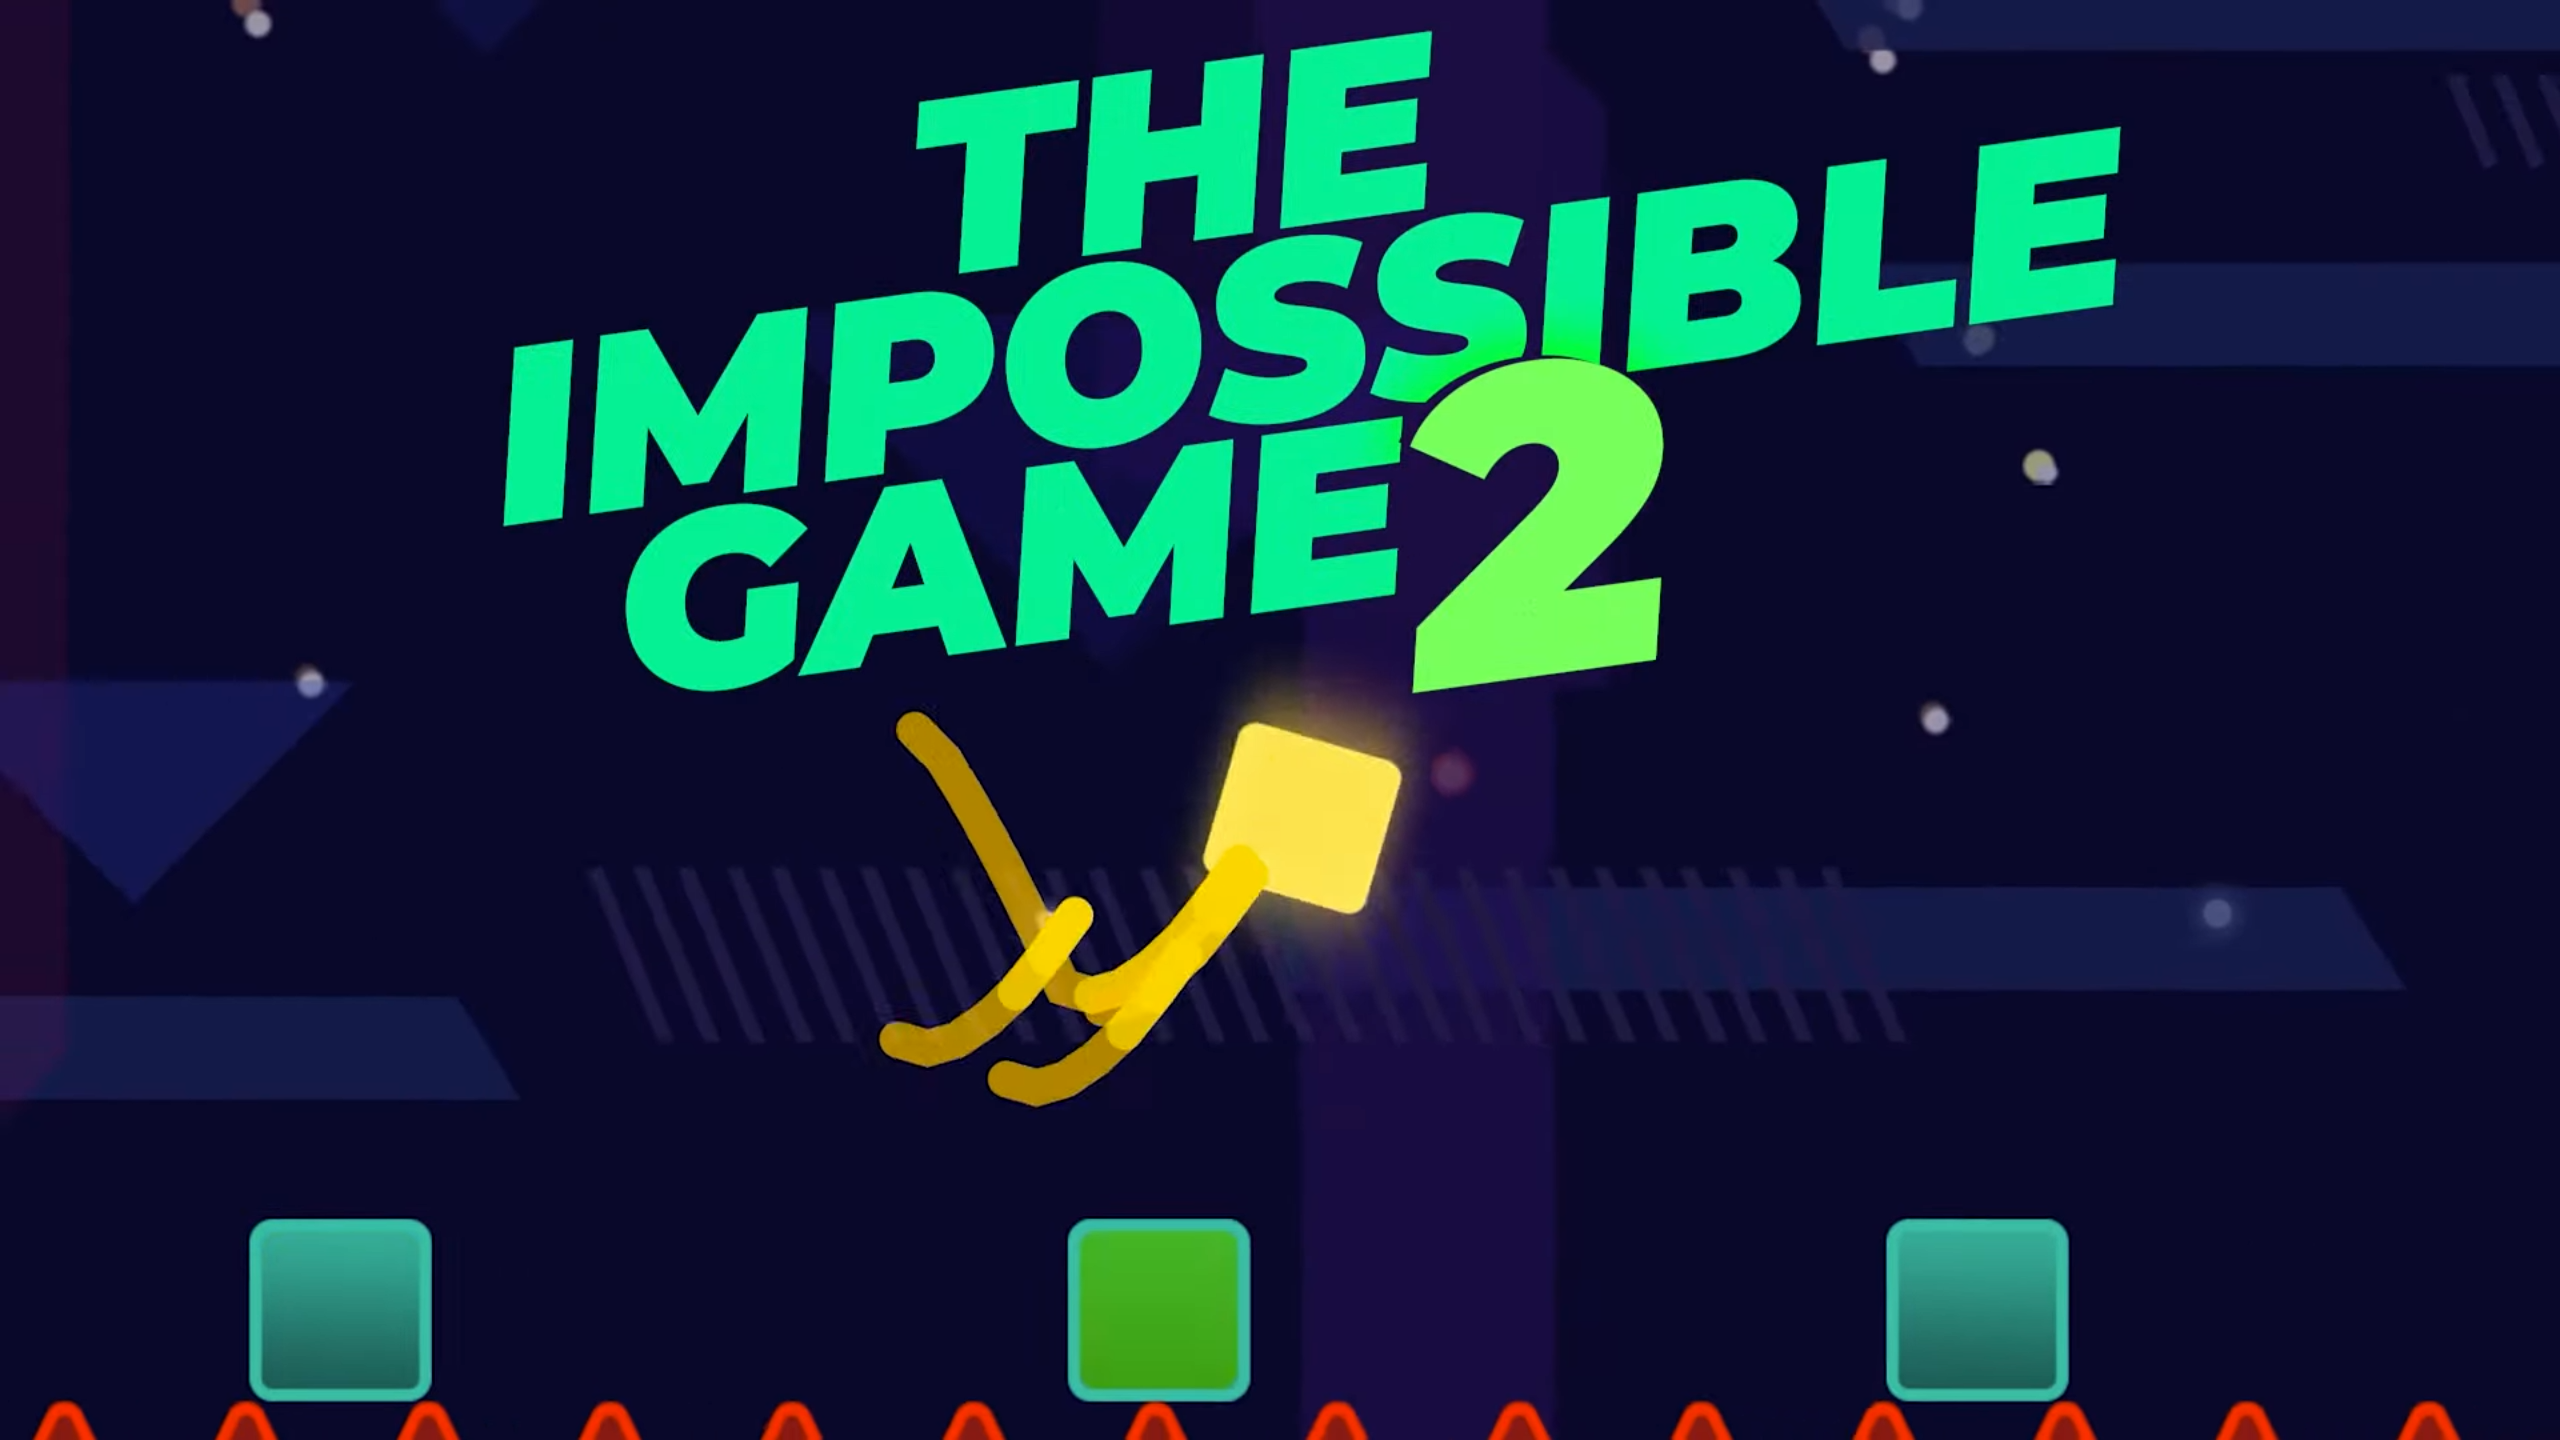 The Impossible Game 2 release hero